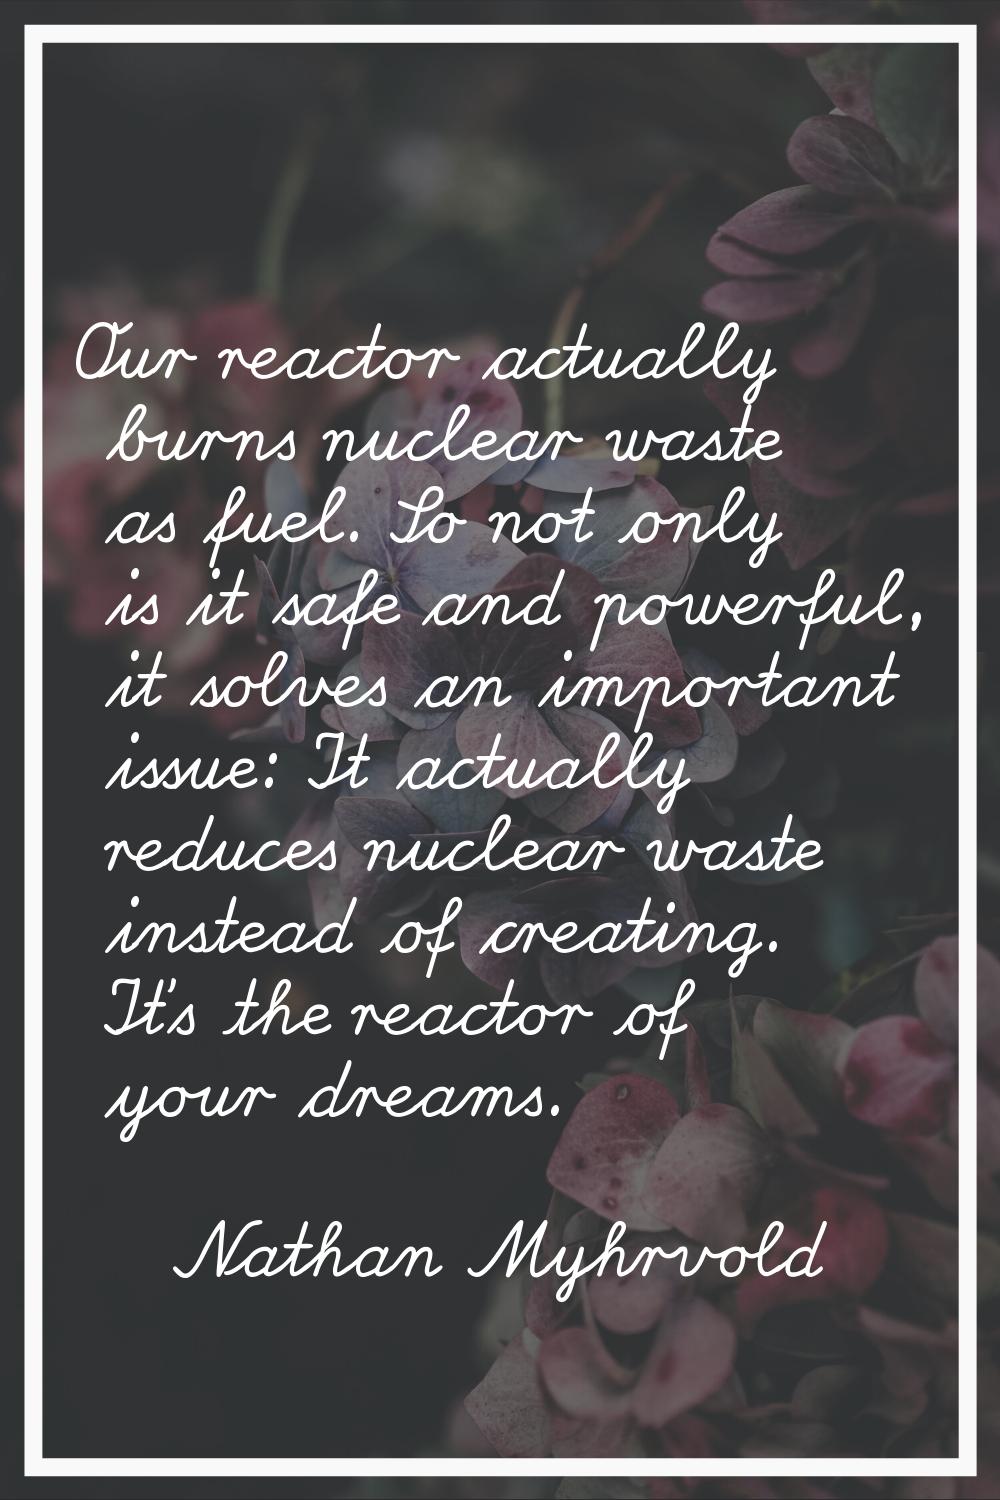 Our reactor actually burns nuclear waste as fuel. So not only is it safe and powerful, it solves an